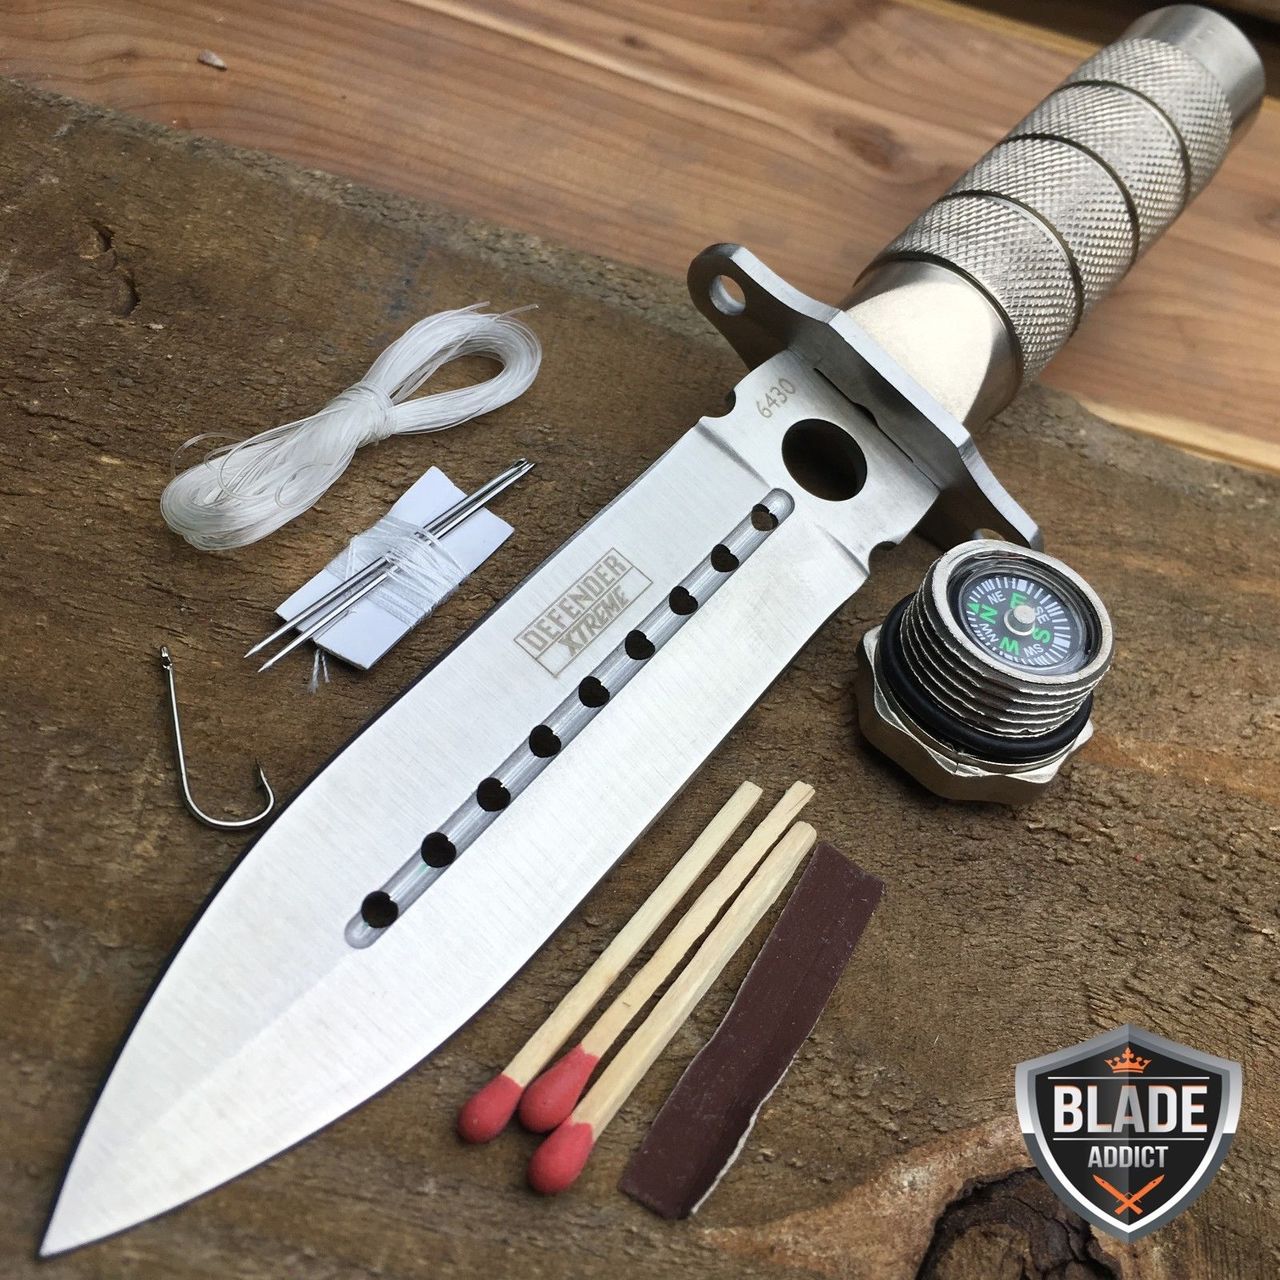 8" Tactical Fishing Hunting Survival Knife w/ Sheath Bowie Survival Kit Combat